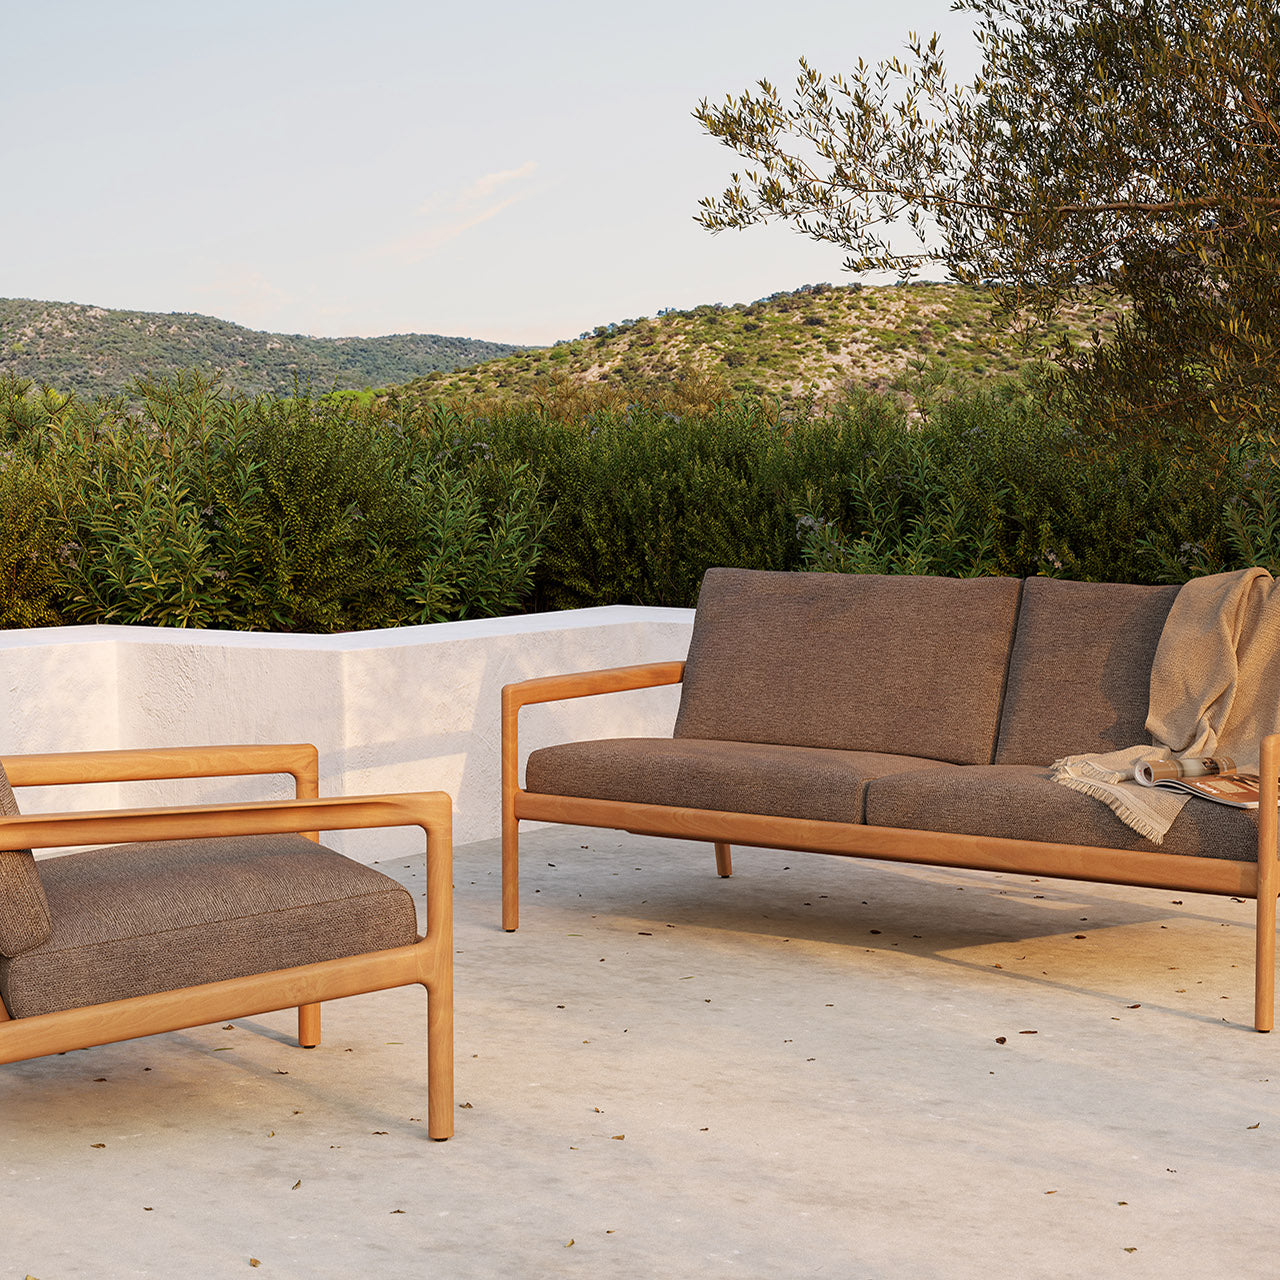 Jack outdoor lounge collection in mocha